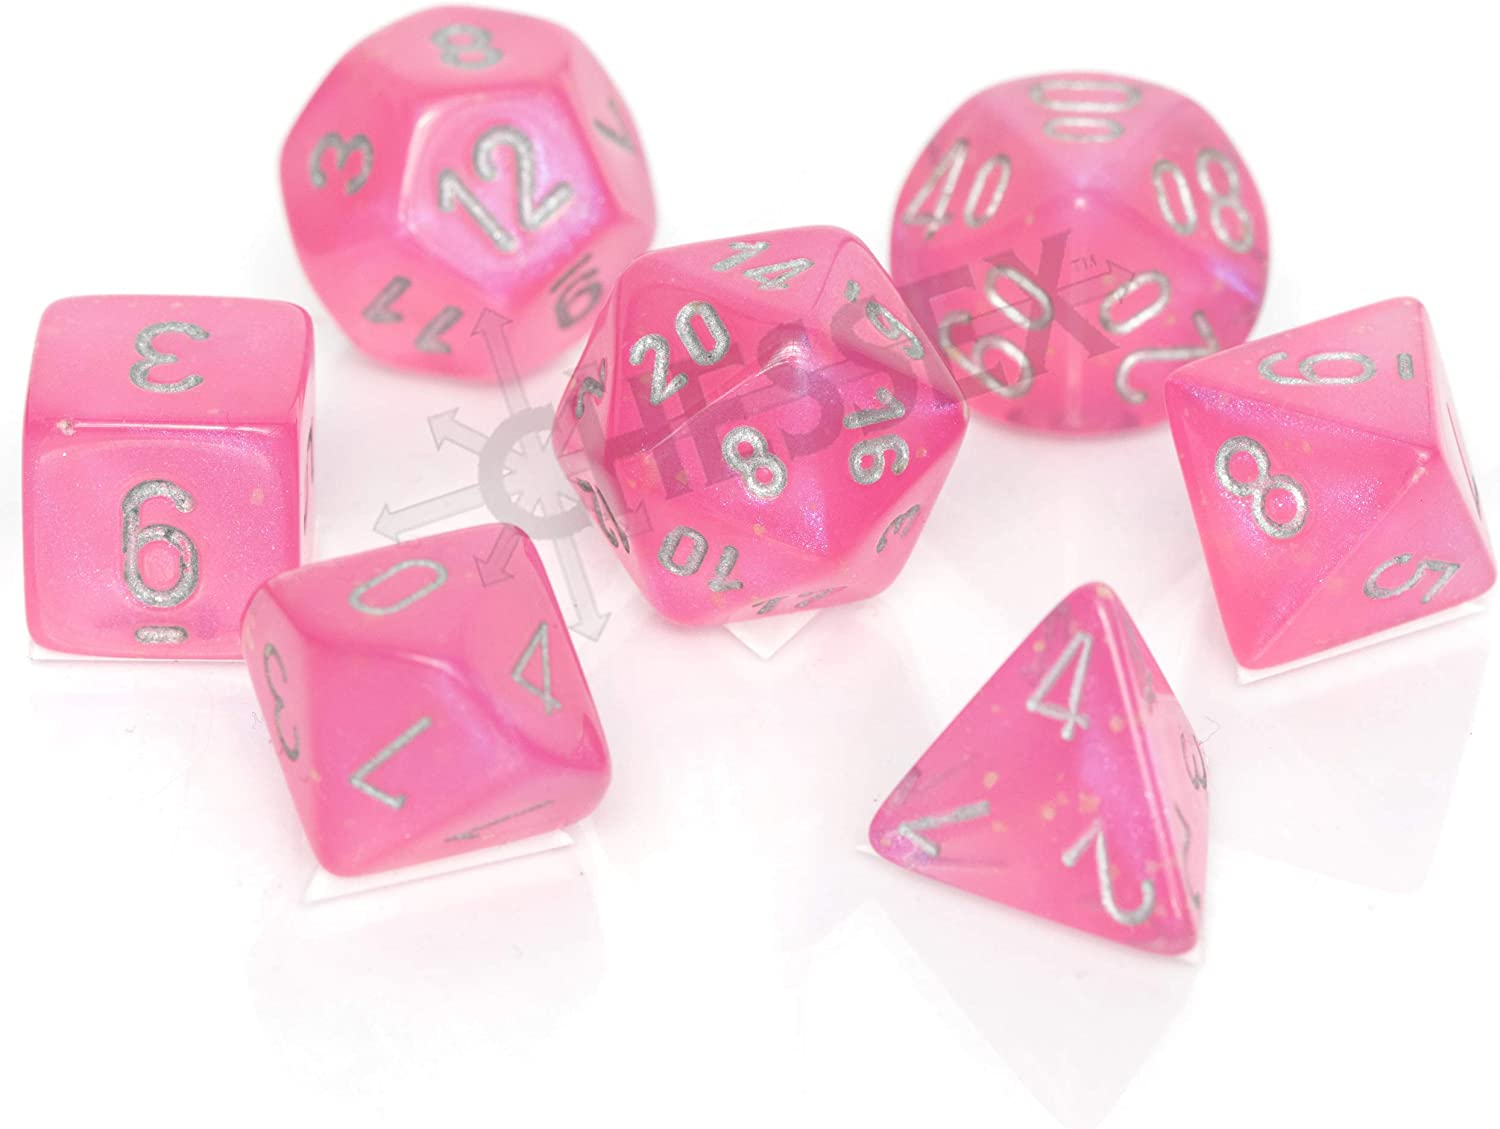 Chessex Polyhedral 7-Die Set - Borealis Pink/Silver with Luminary 27584 | CCGPrime